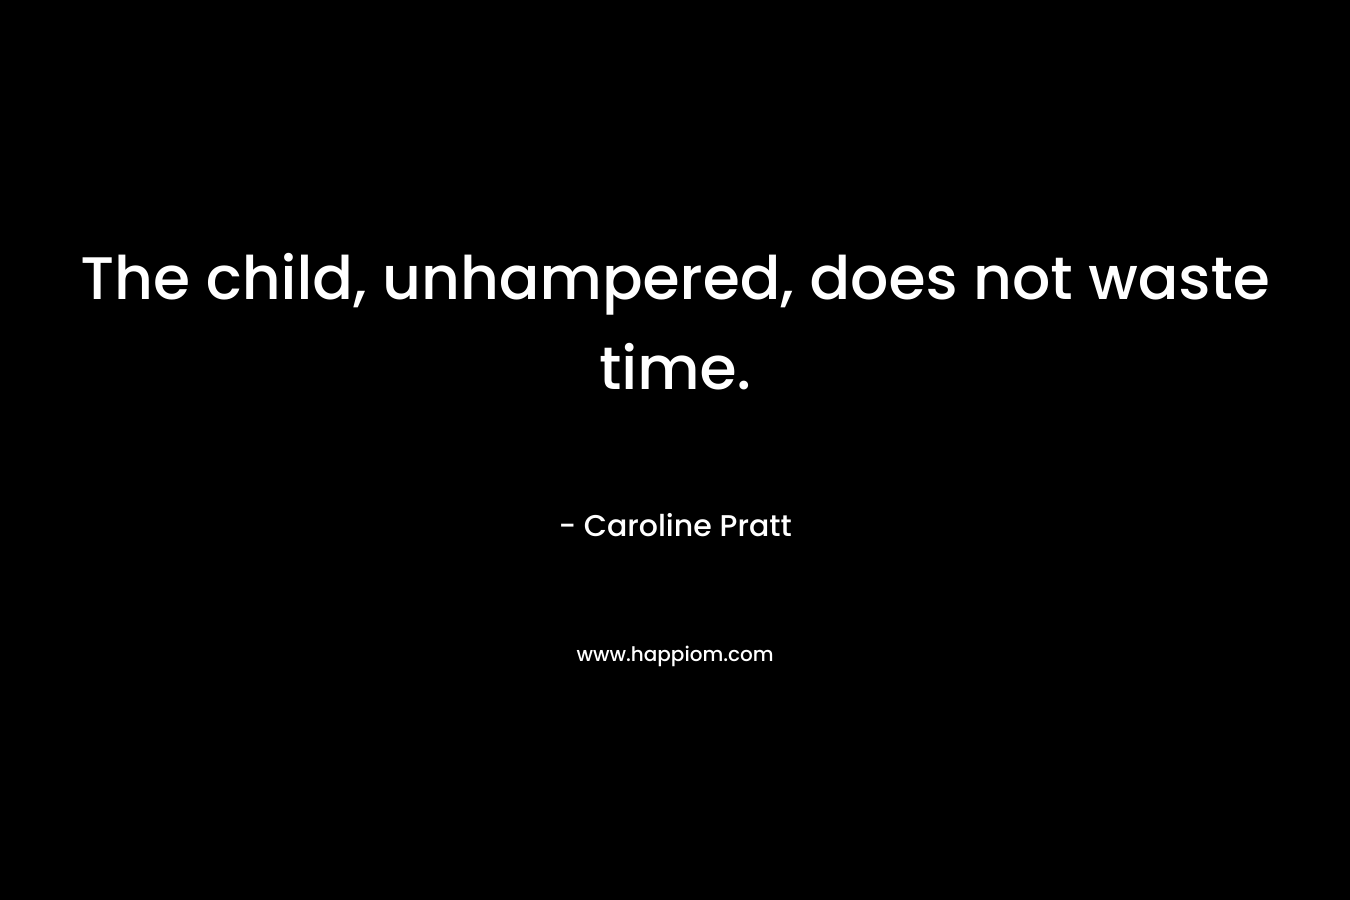 The child, unhampered, does not waste time.